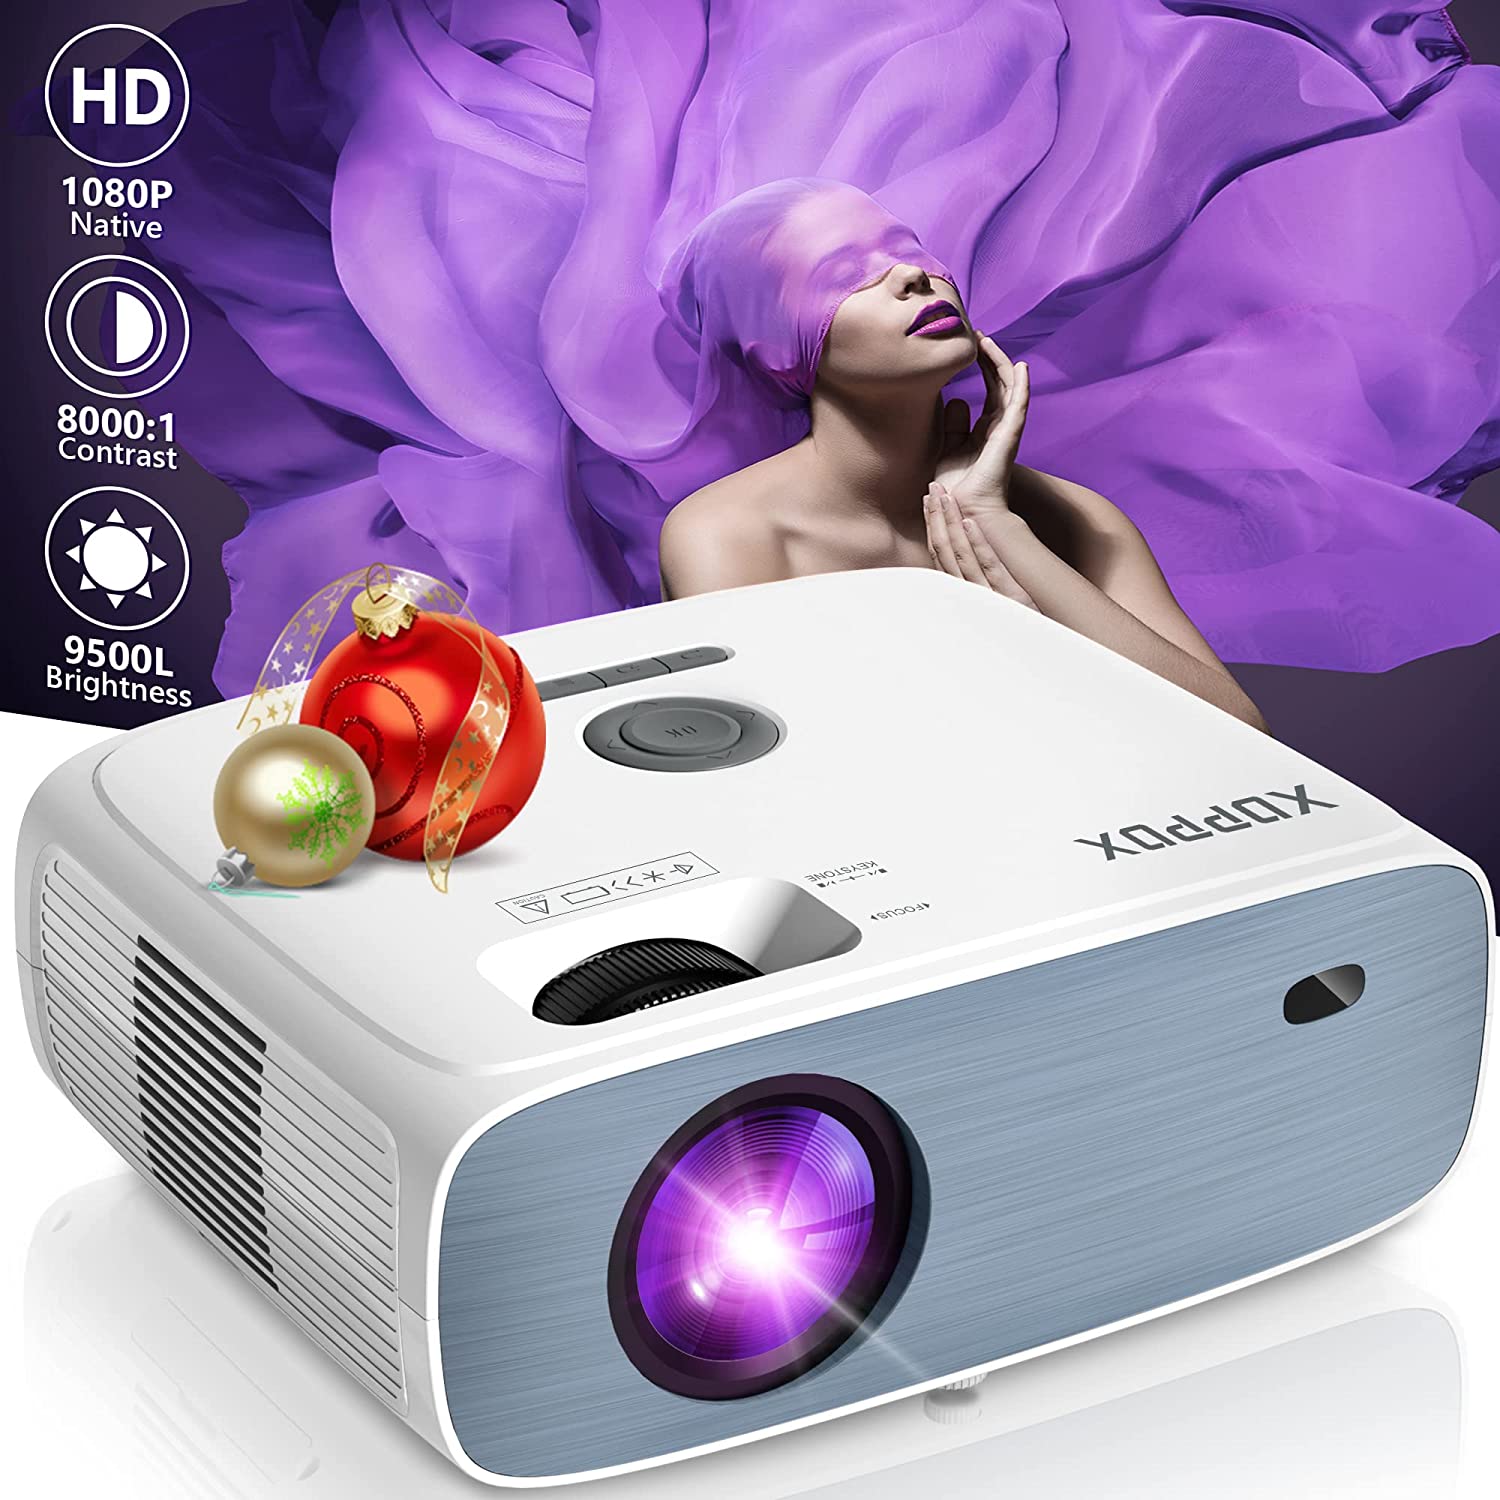 XOPPOX Video Projector: Native 1080p Projector